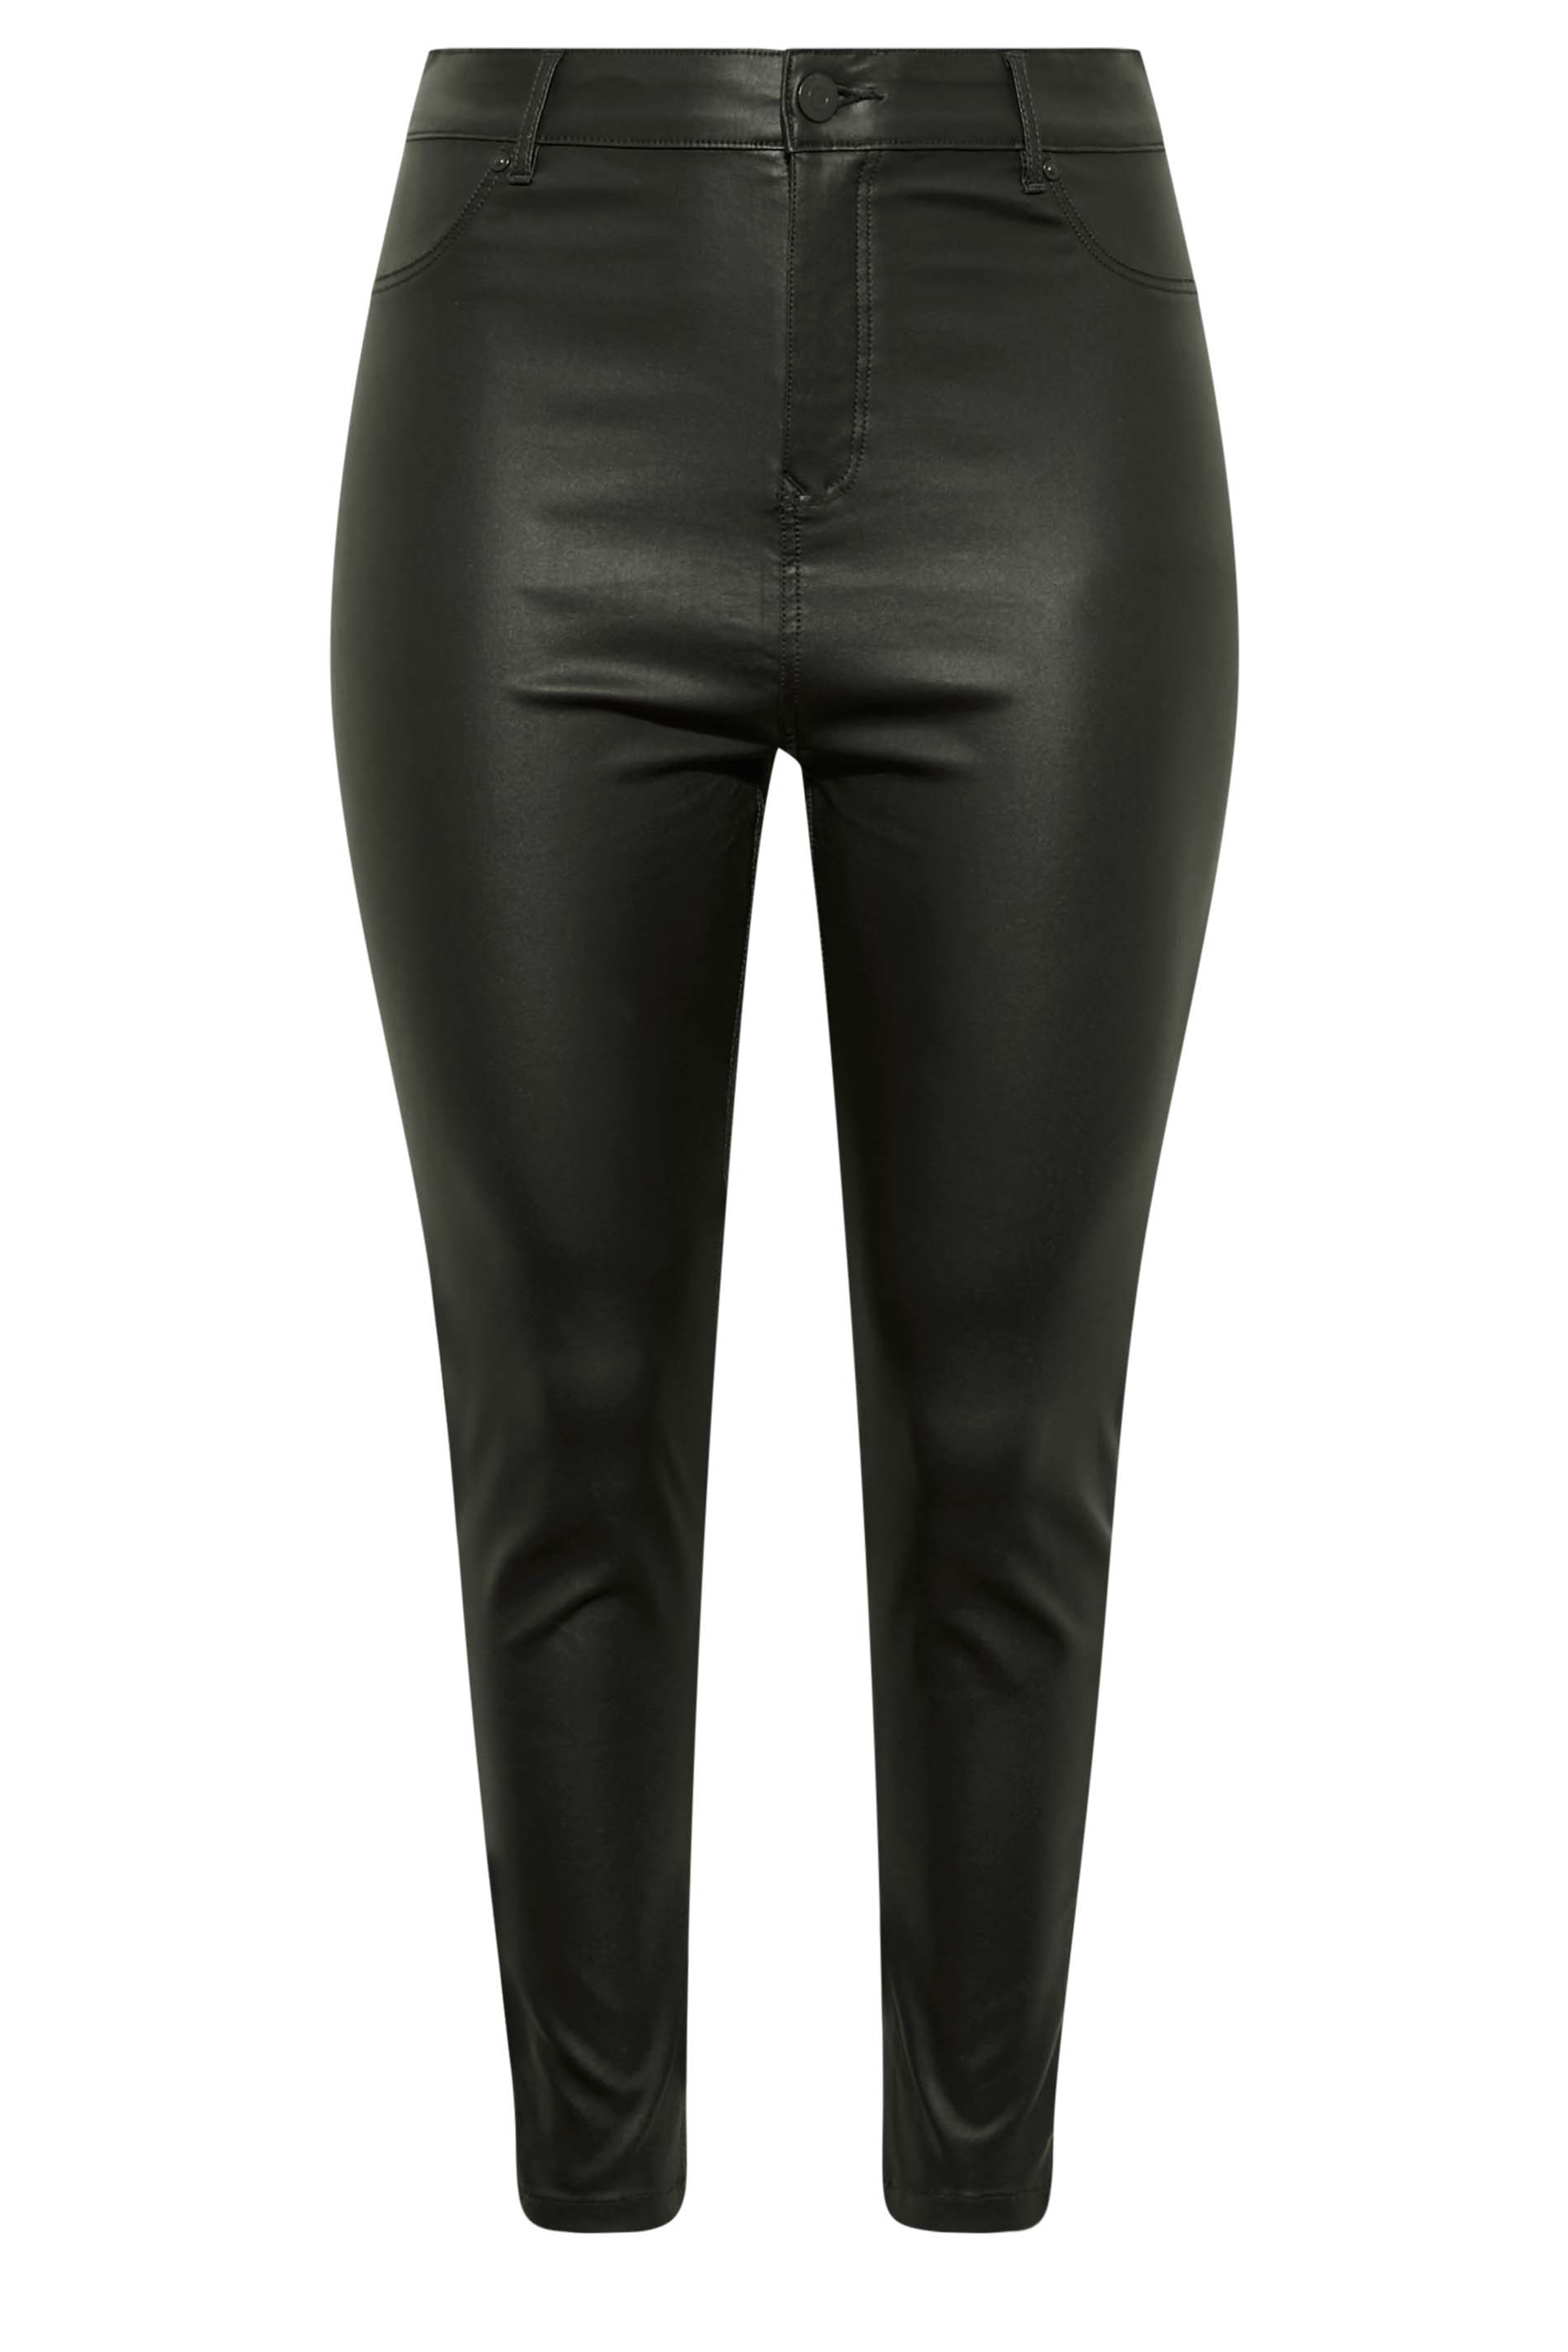 Plus Black Coated Skinny Stretch Jeans | Yours Clothing